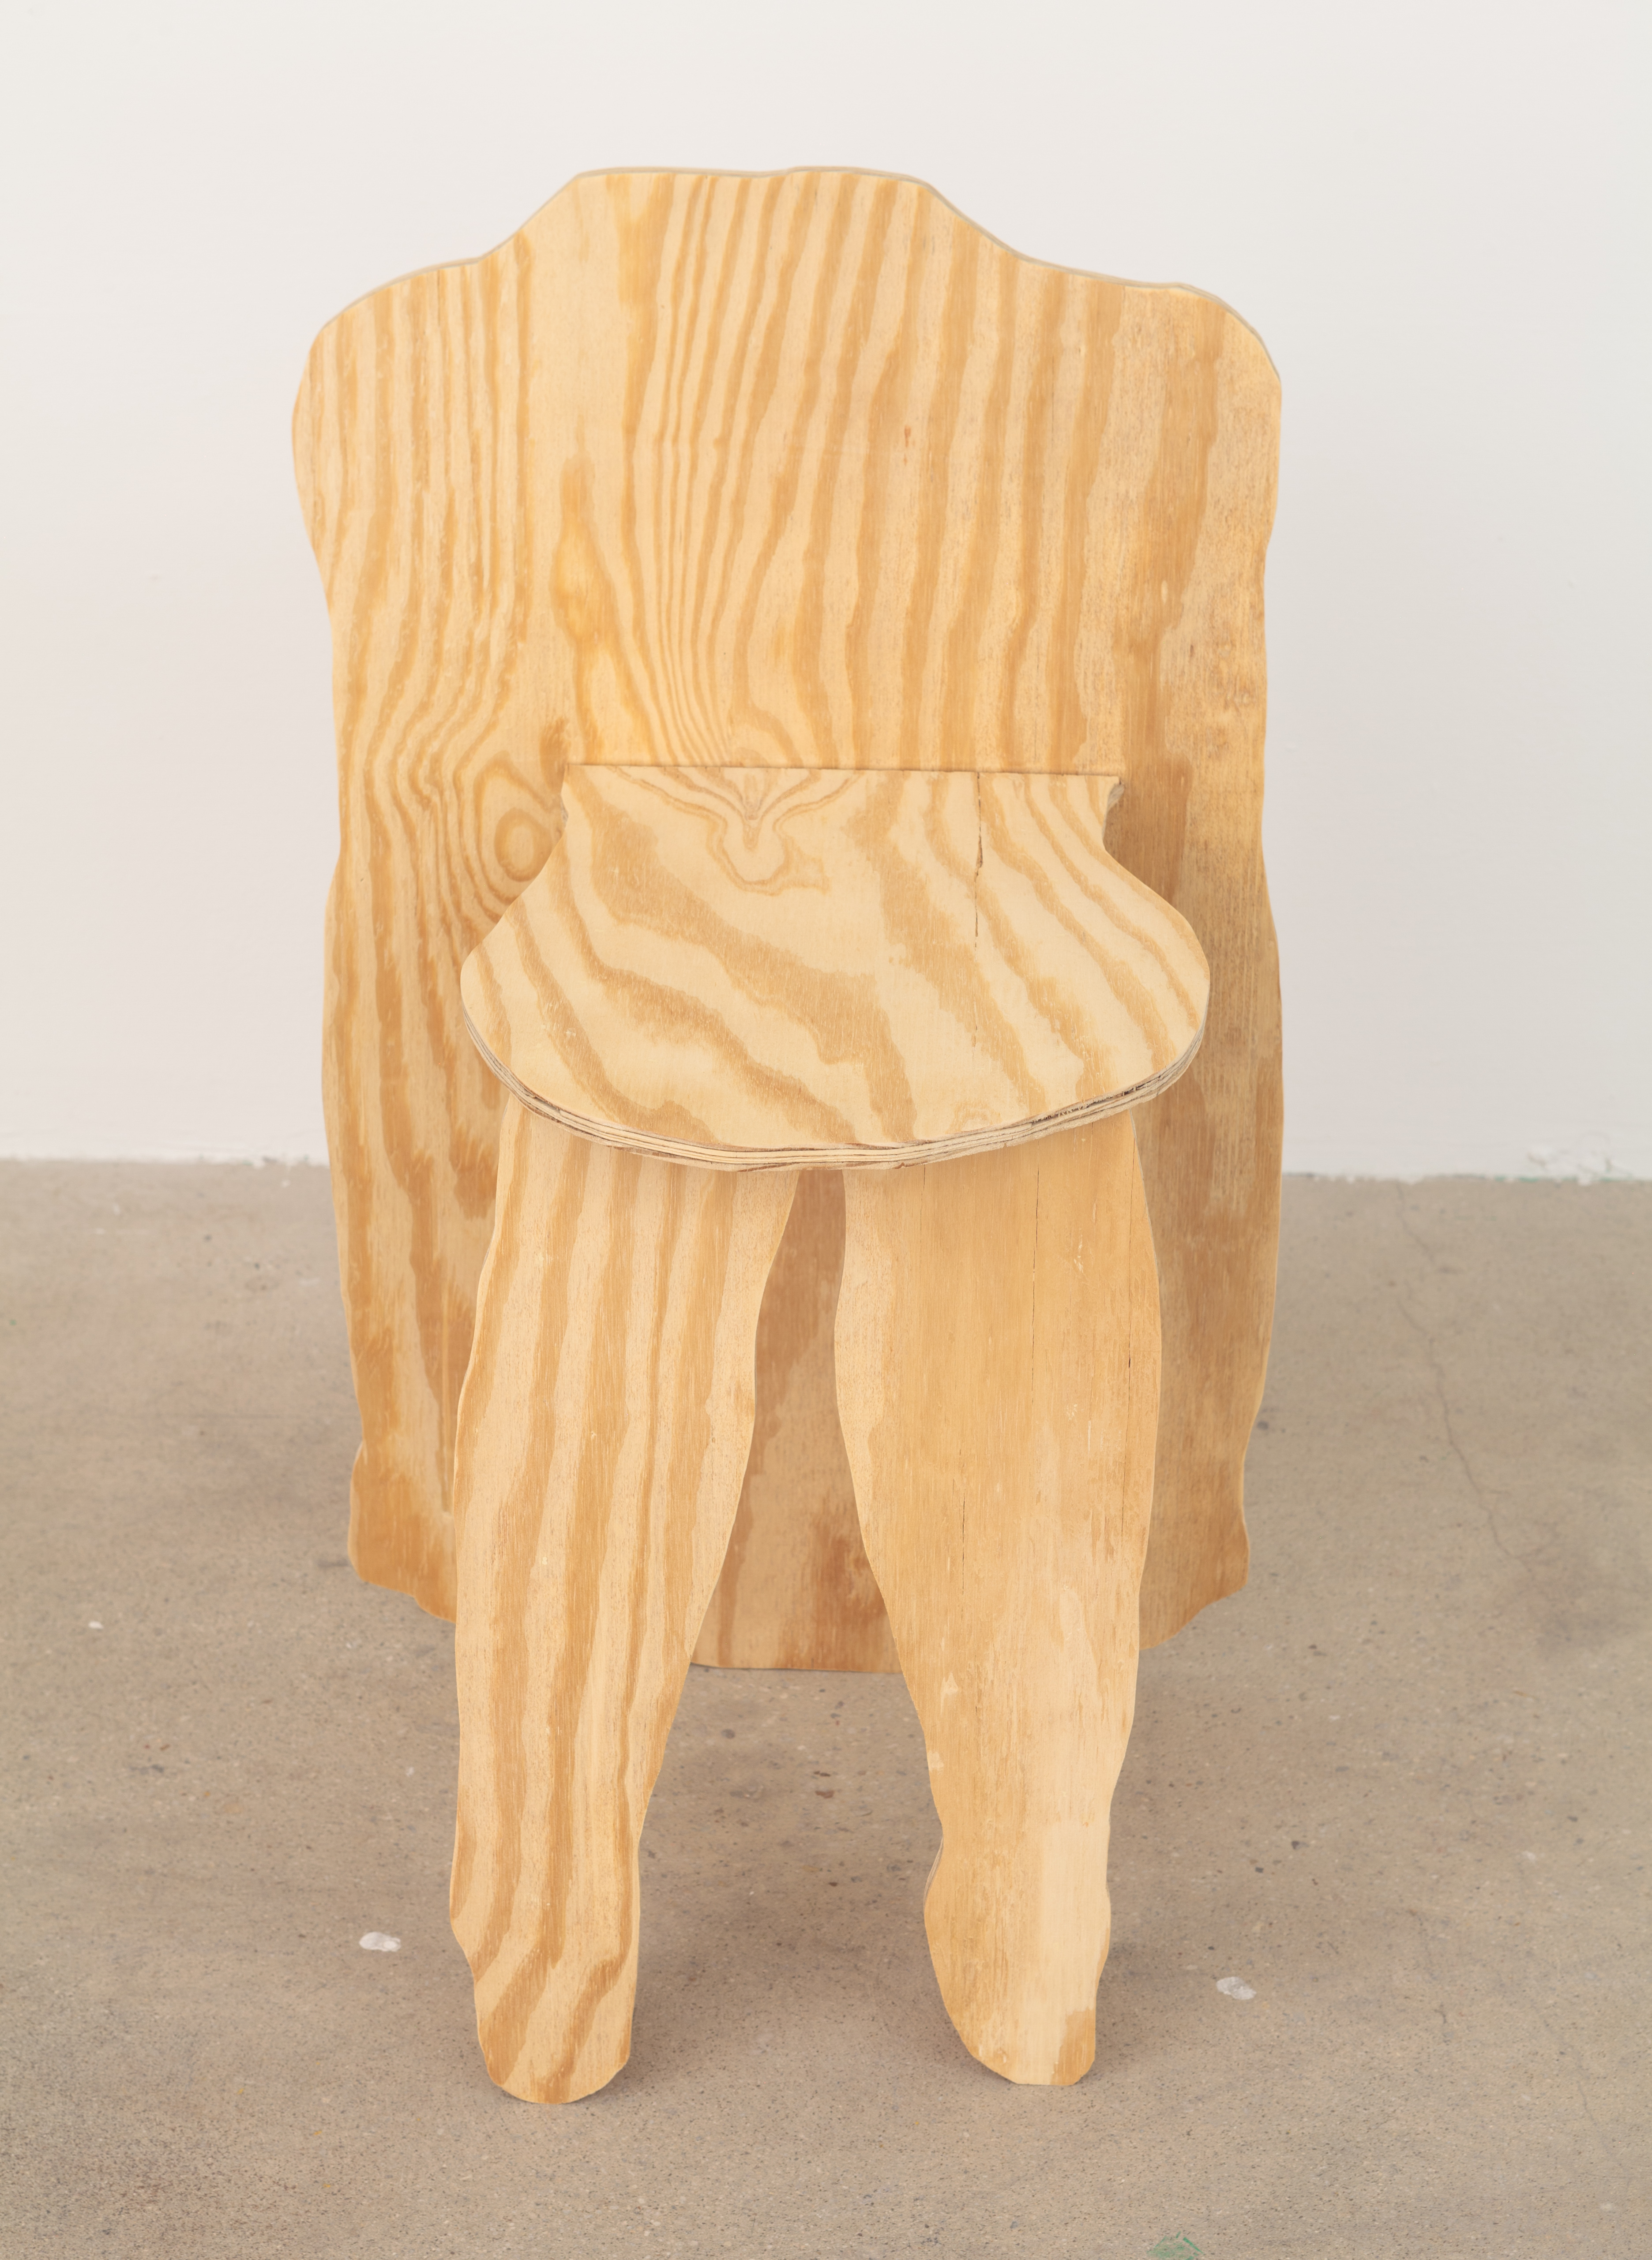 11_Inverted_Chair_1_2015_plywood